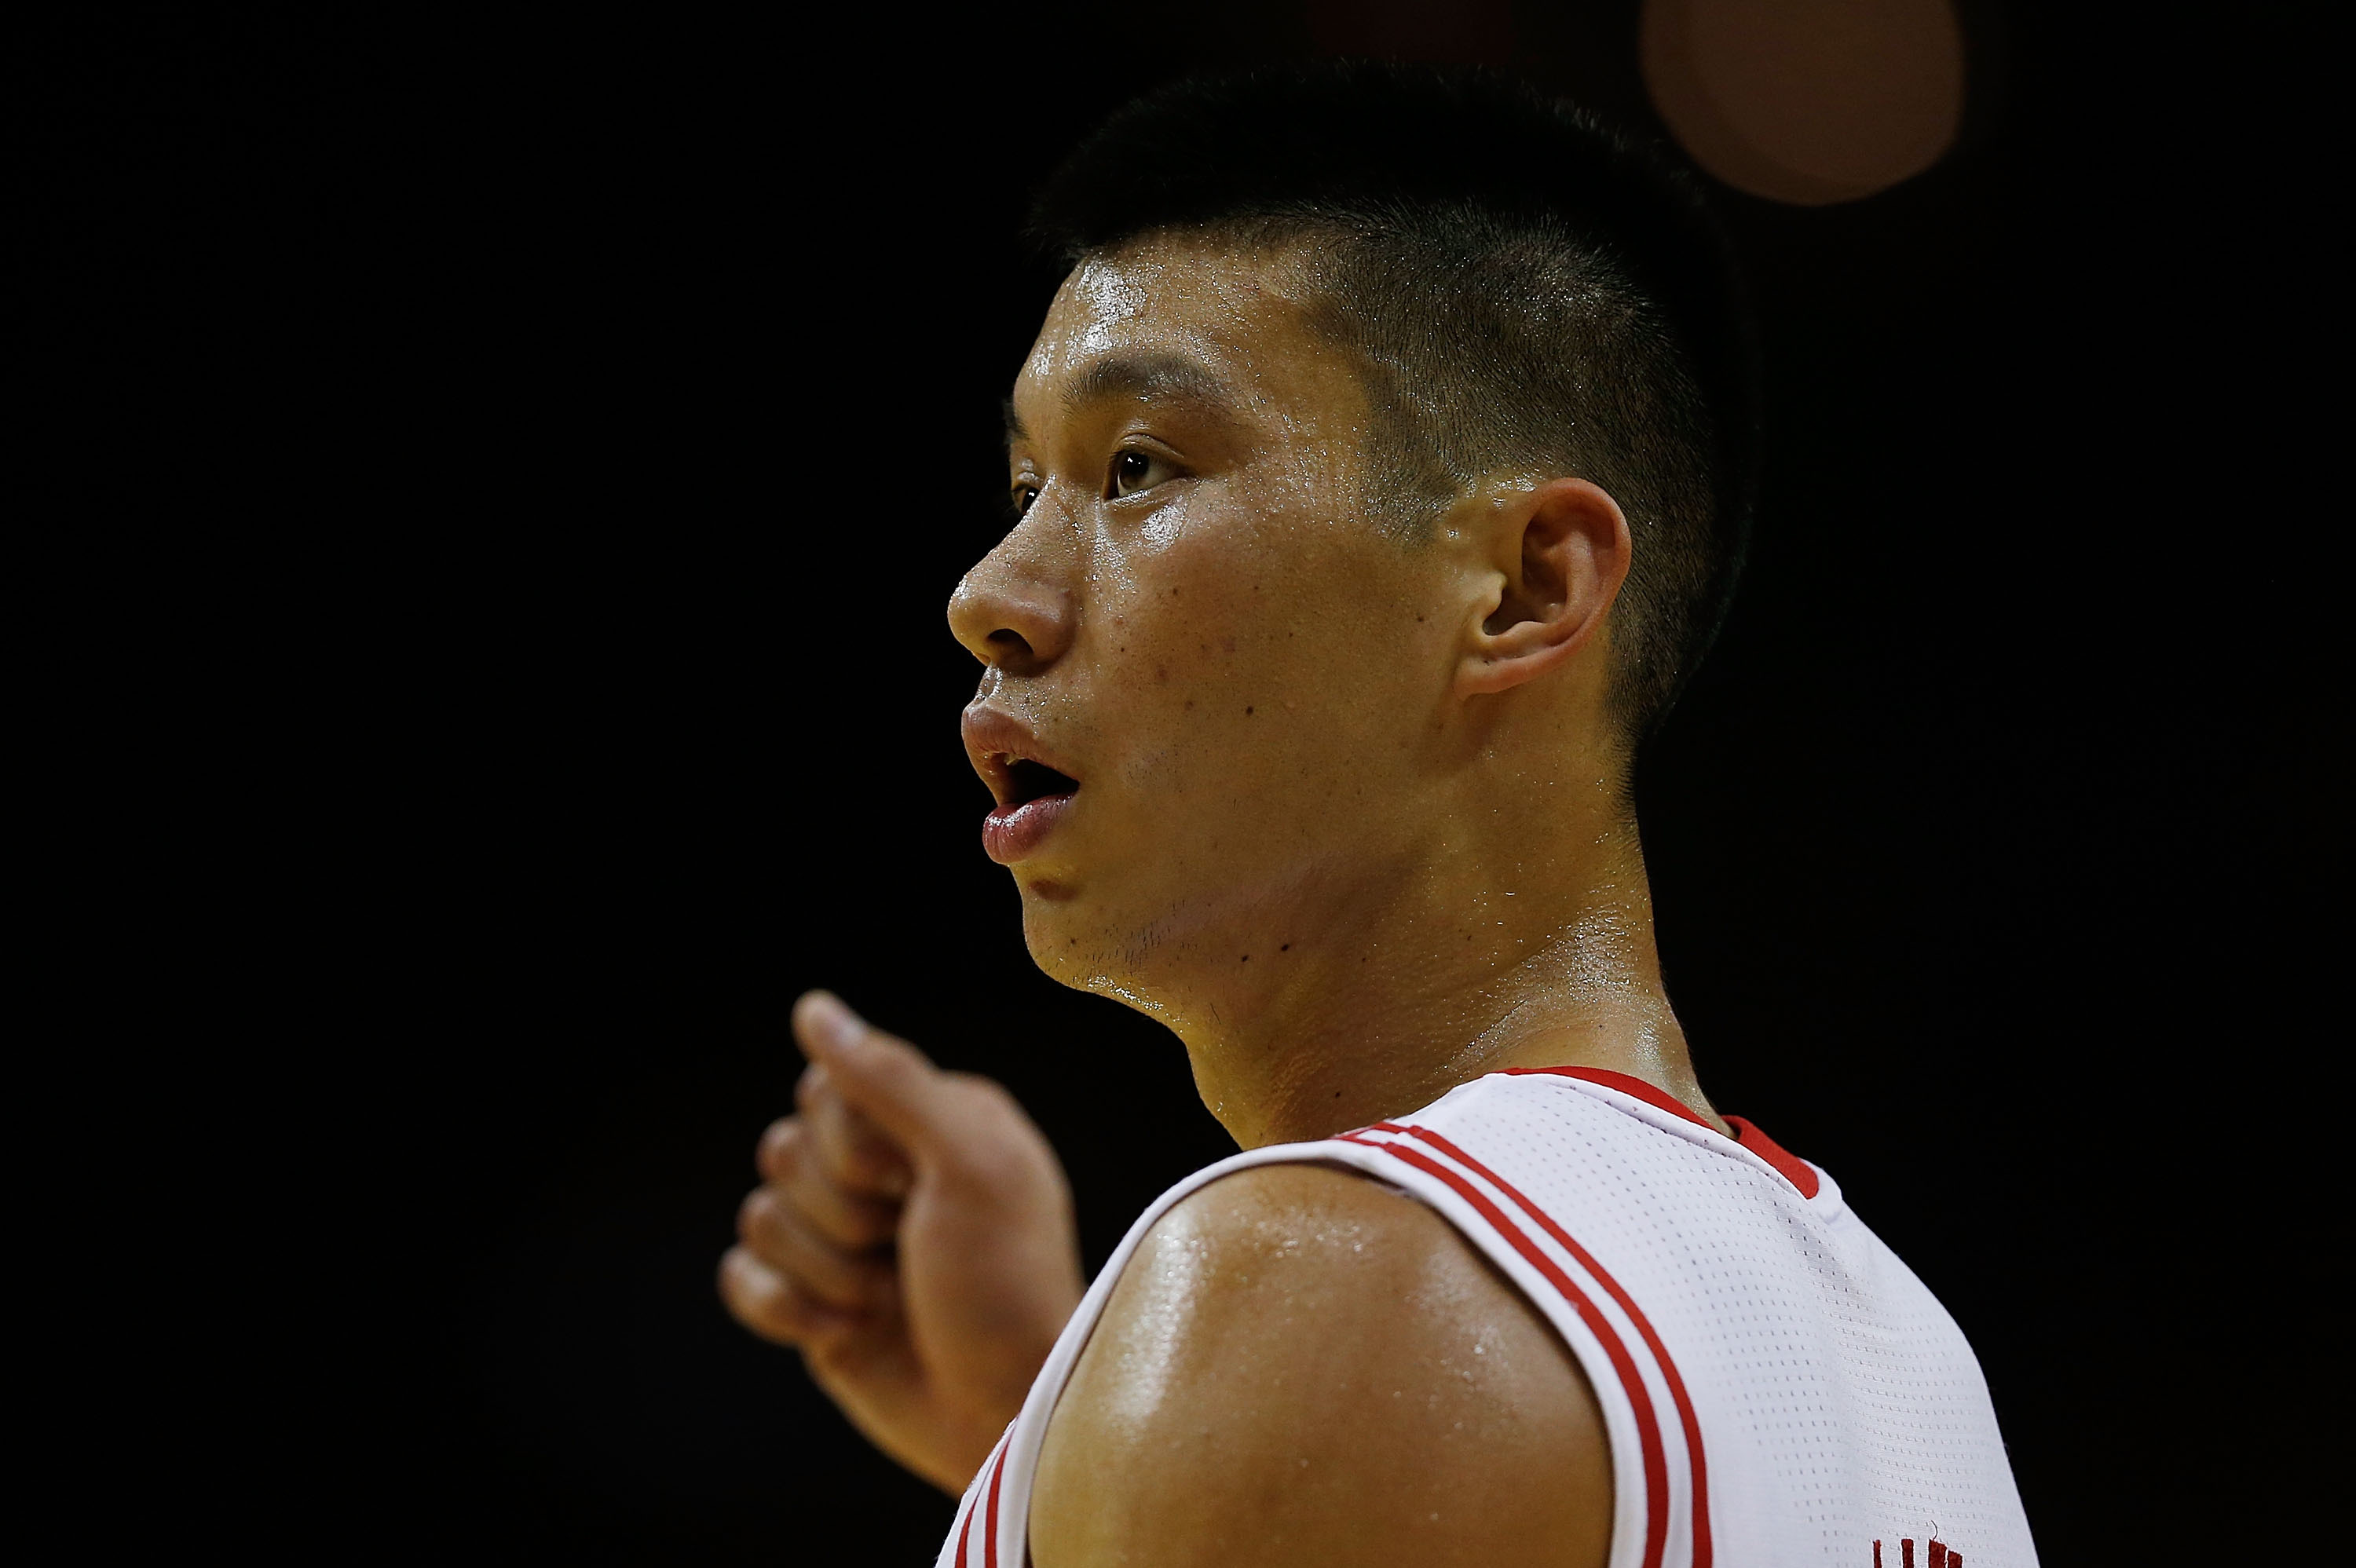 Jeremy Lin won't be joining Warriors after failing to get CBA